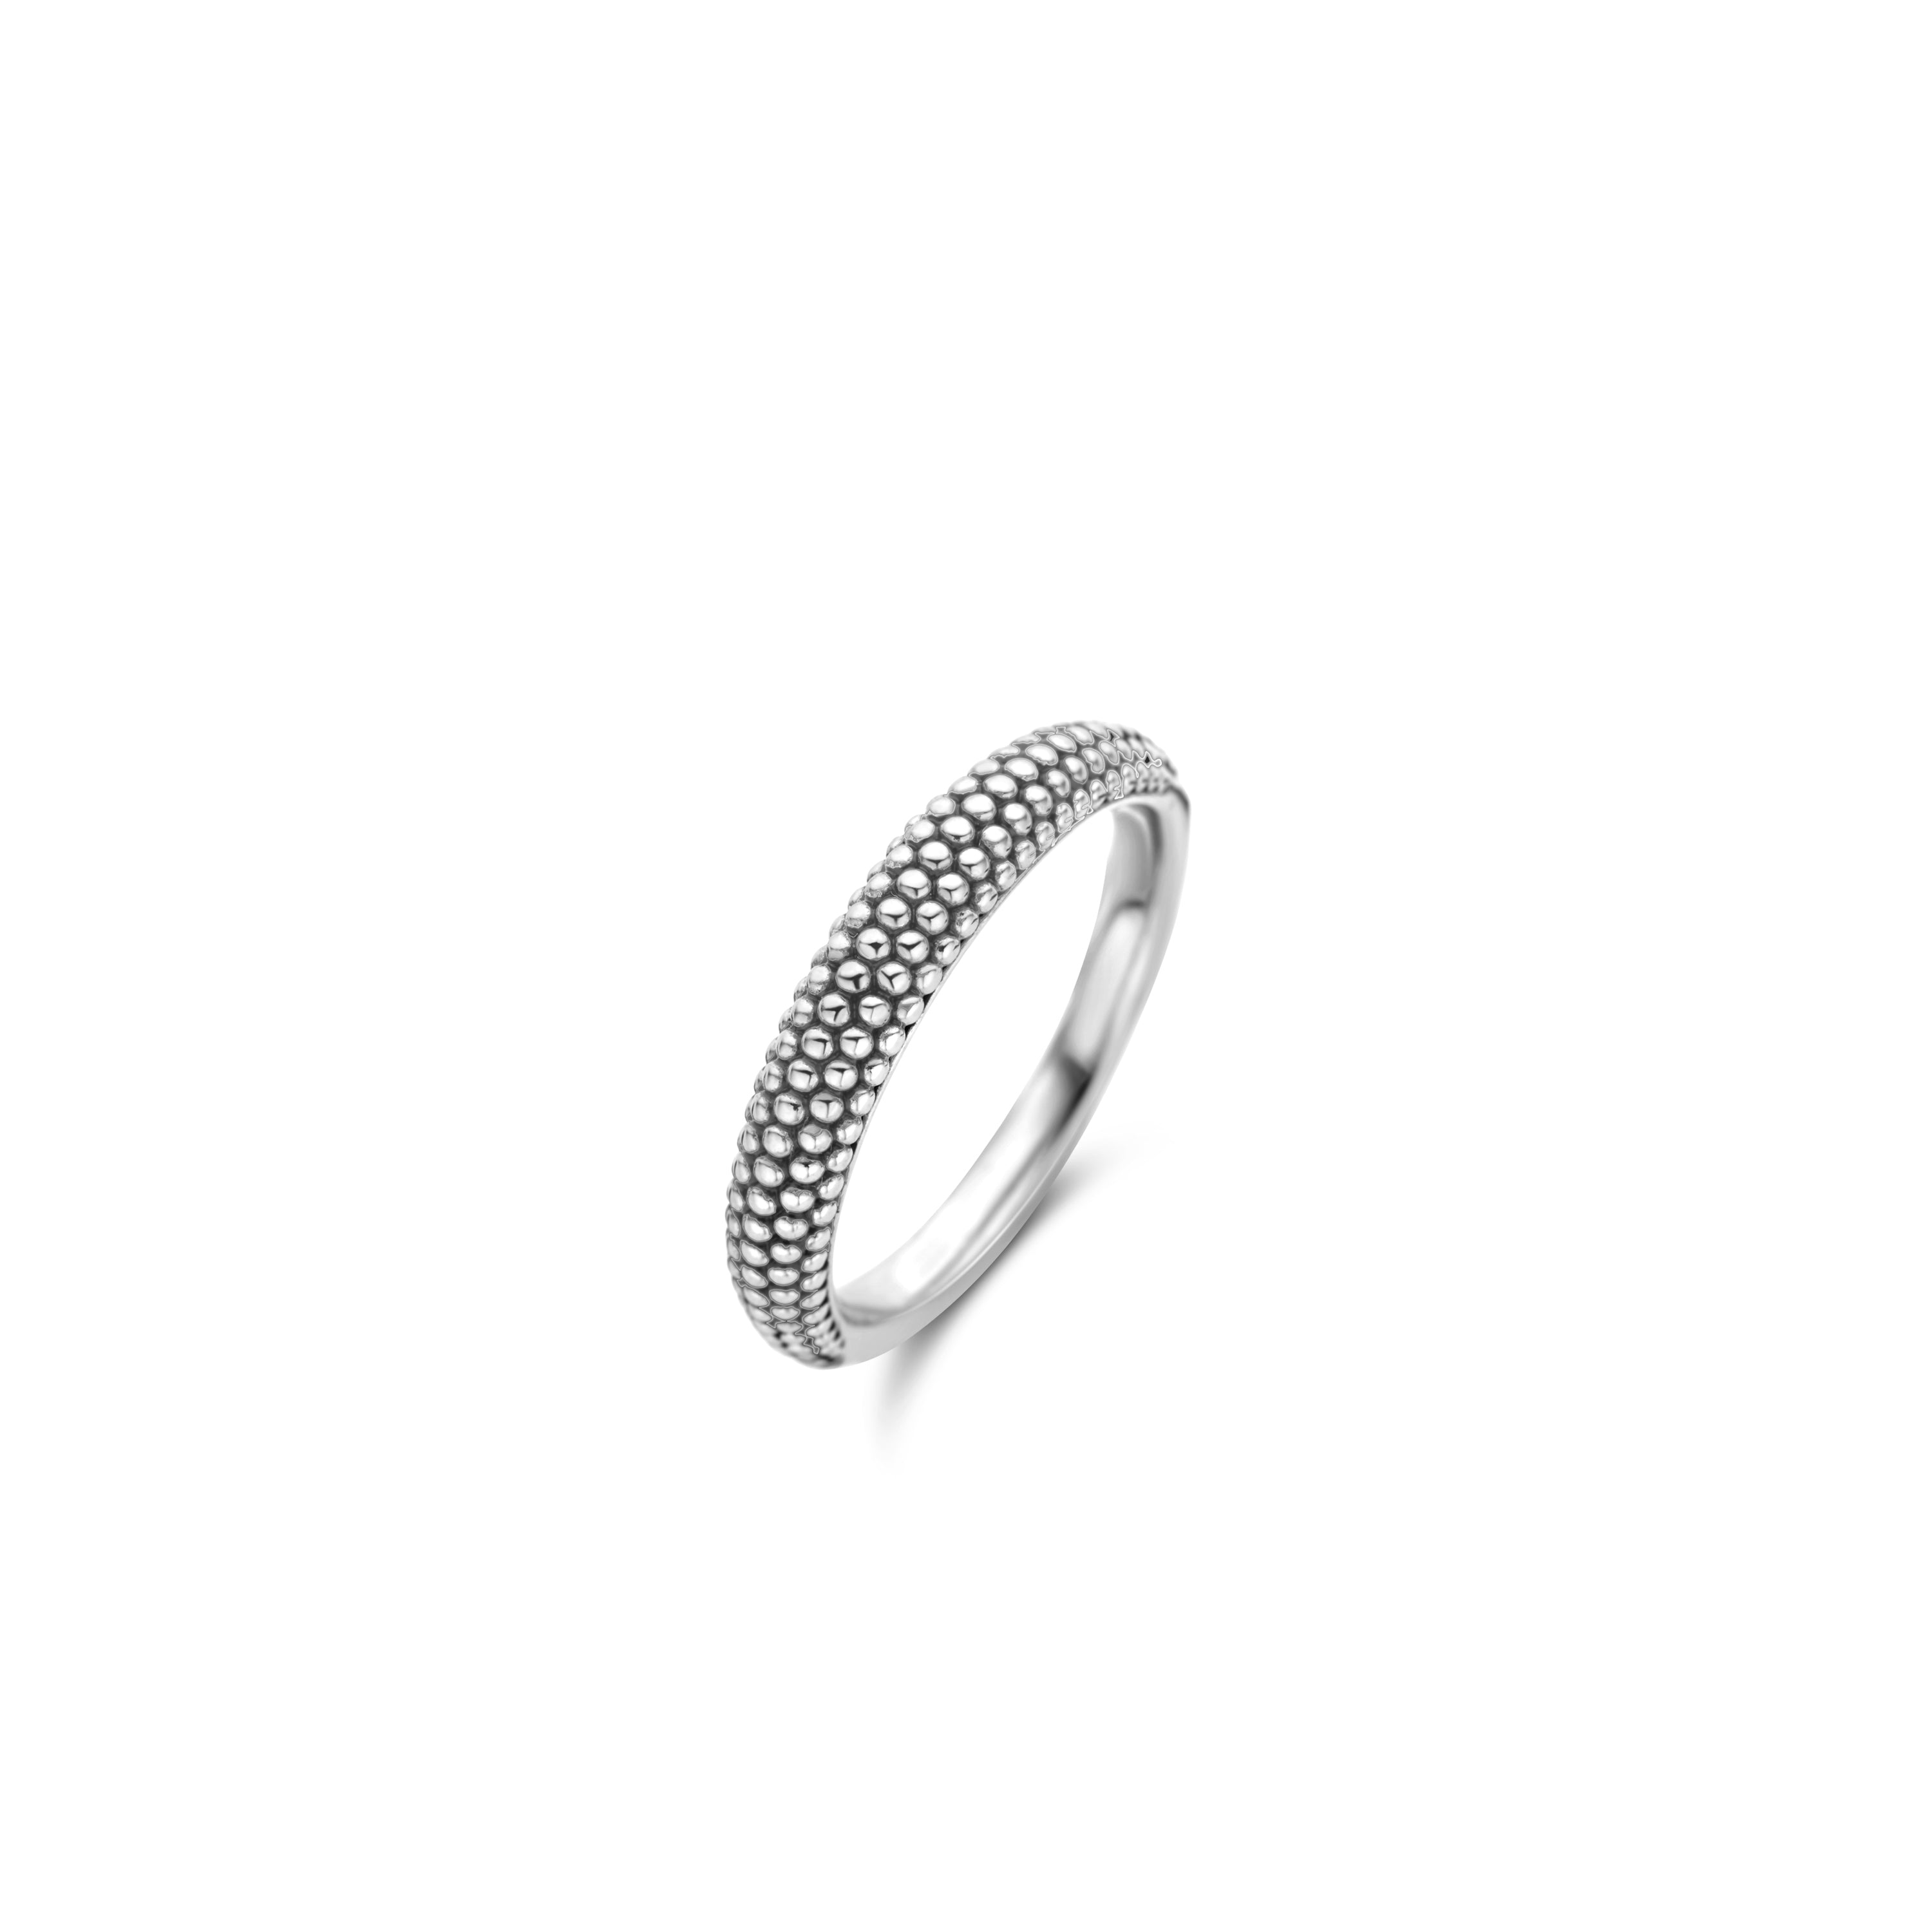 Urchin Silver Stackable Ring